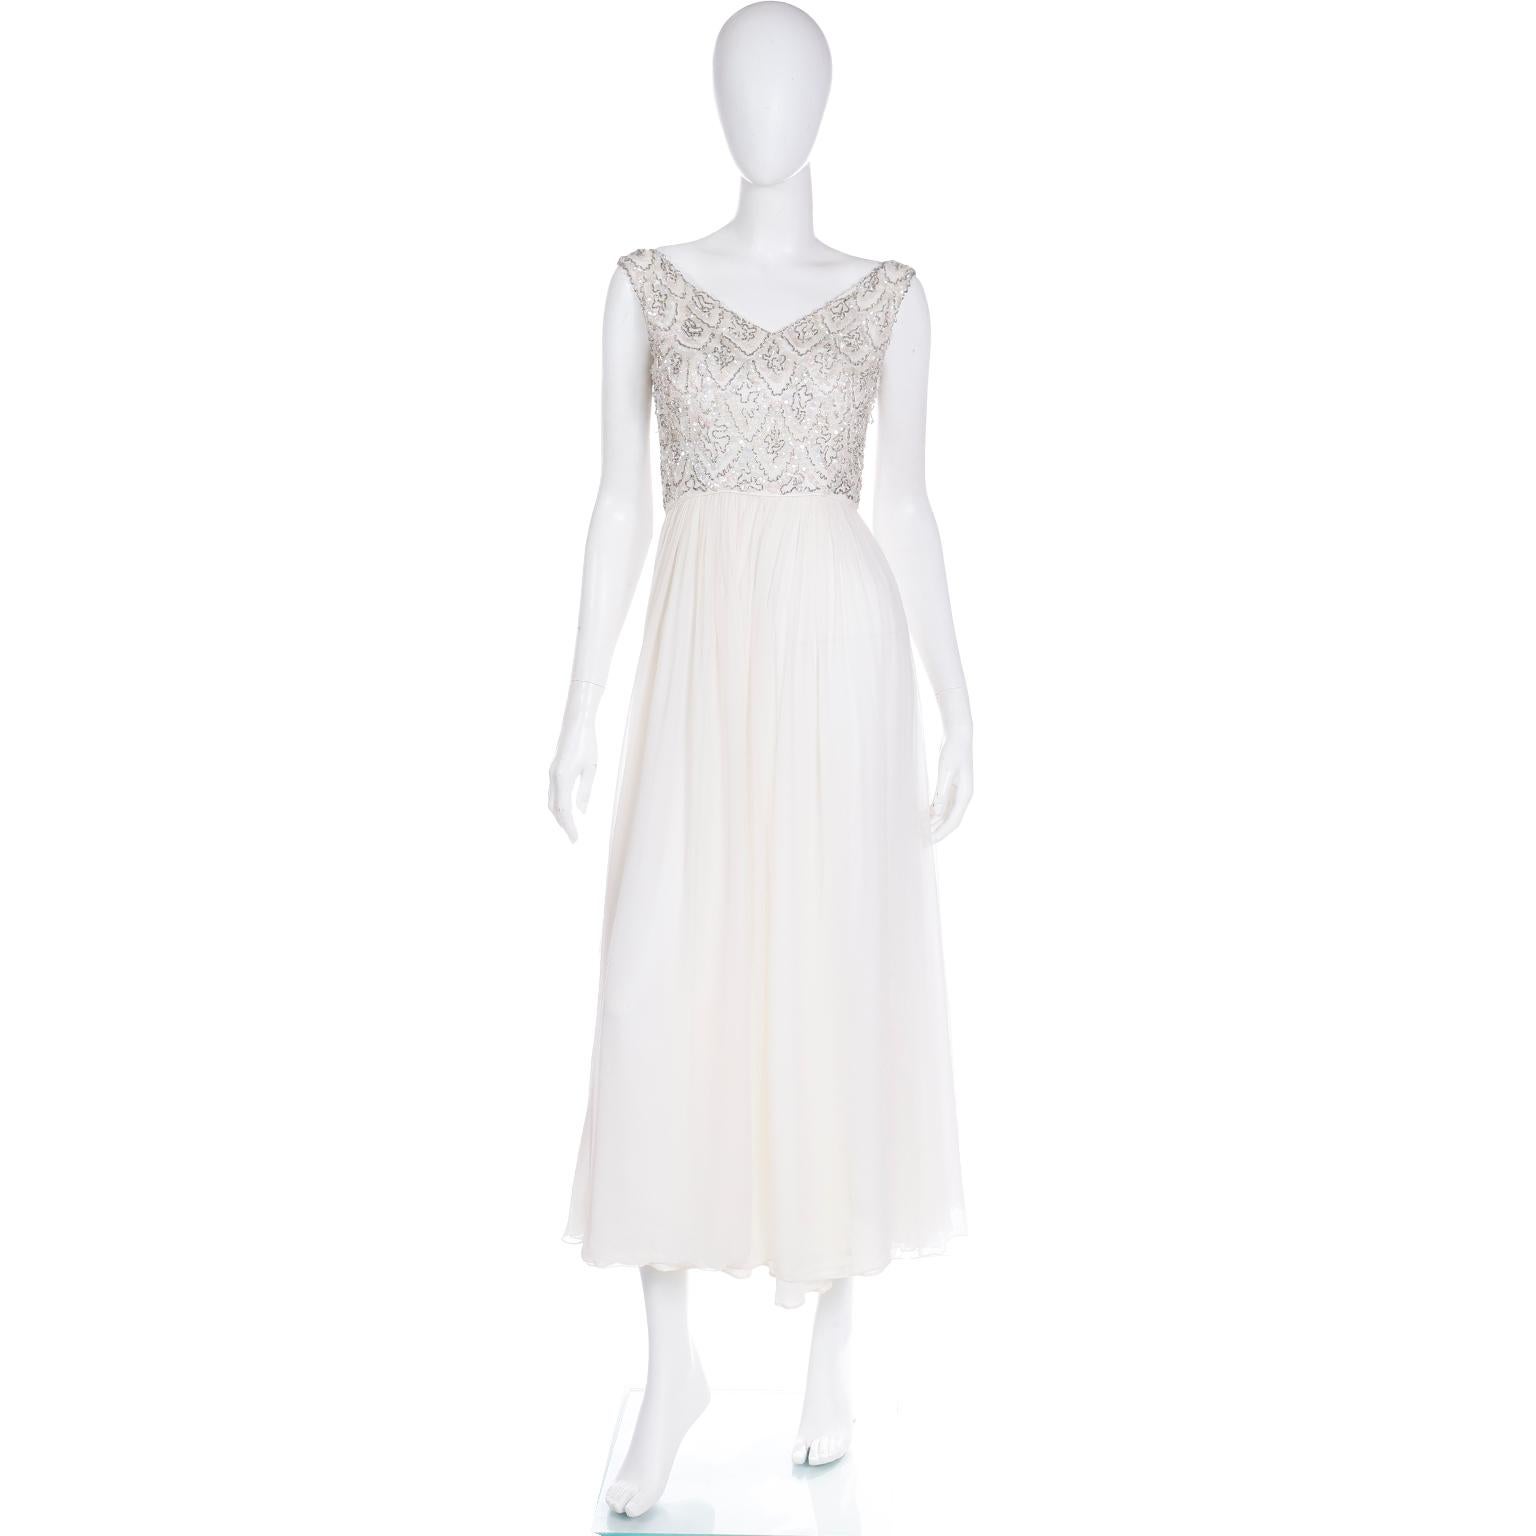 This princess worthy white silk chiffon evening dress is truly magical with its beaded bodice and flowing full skirt. This 1960's dress has a v neckline and shimmering silver beads and iridescent sequins. There is a center back zipper for closure